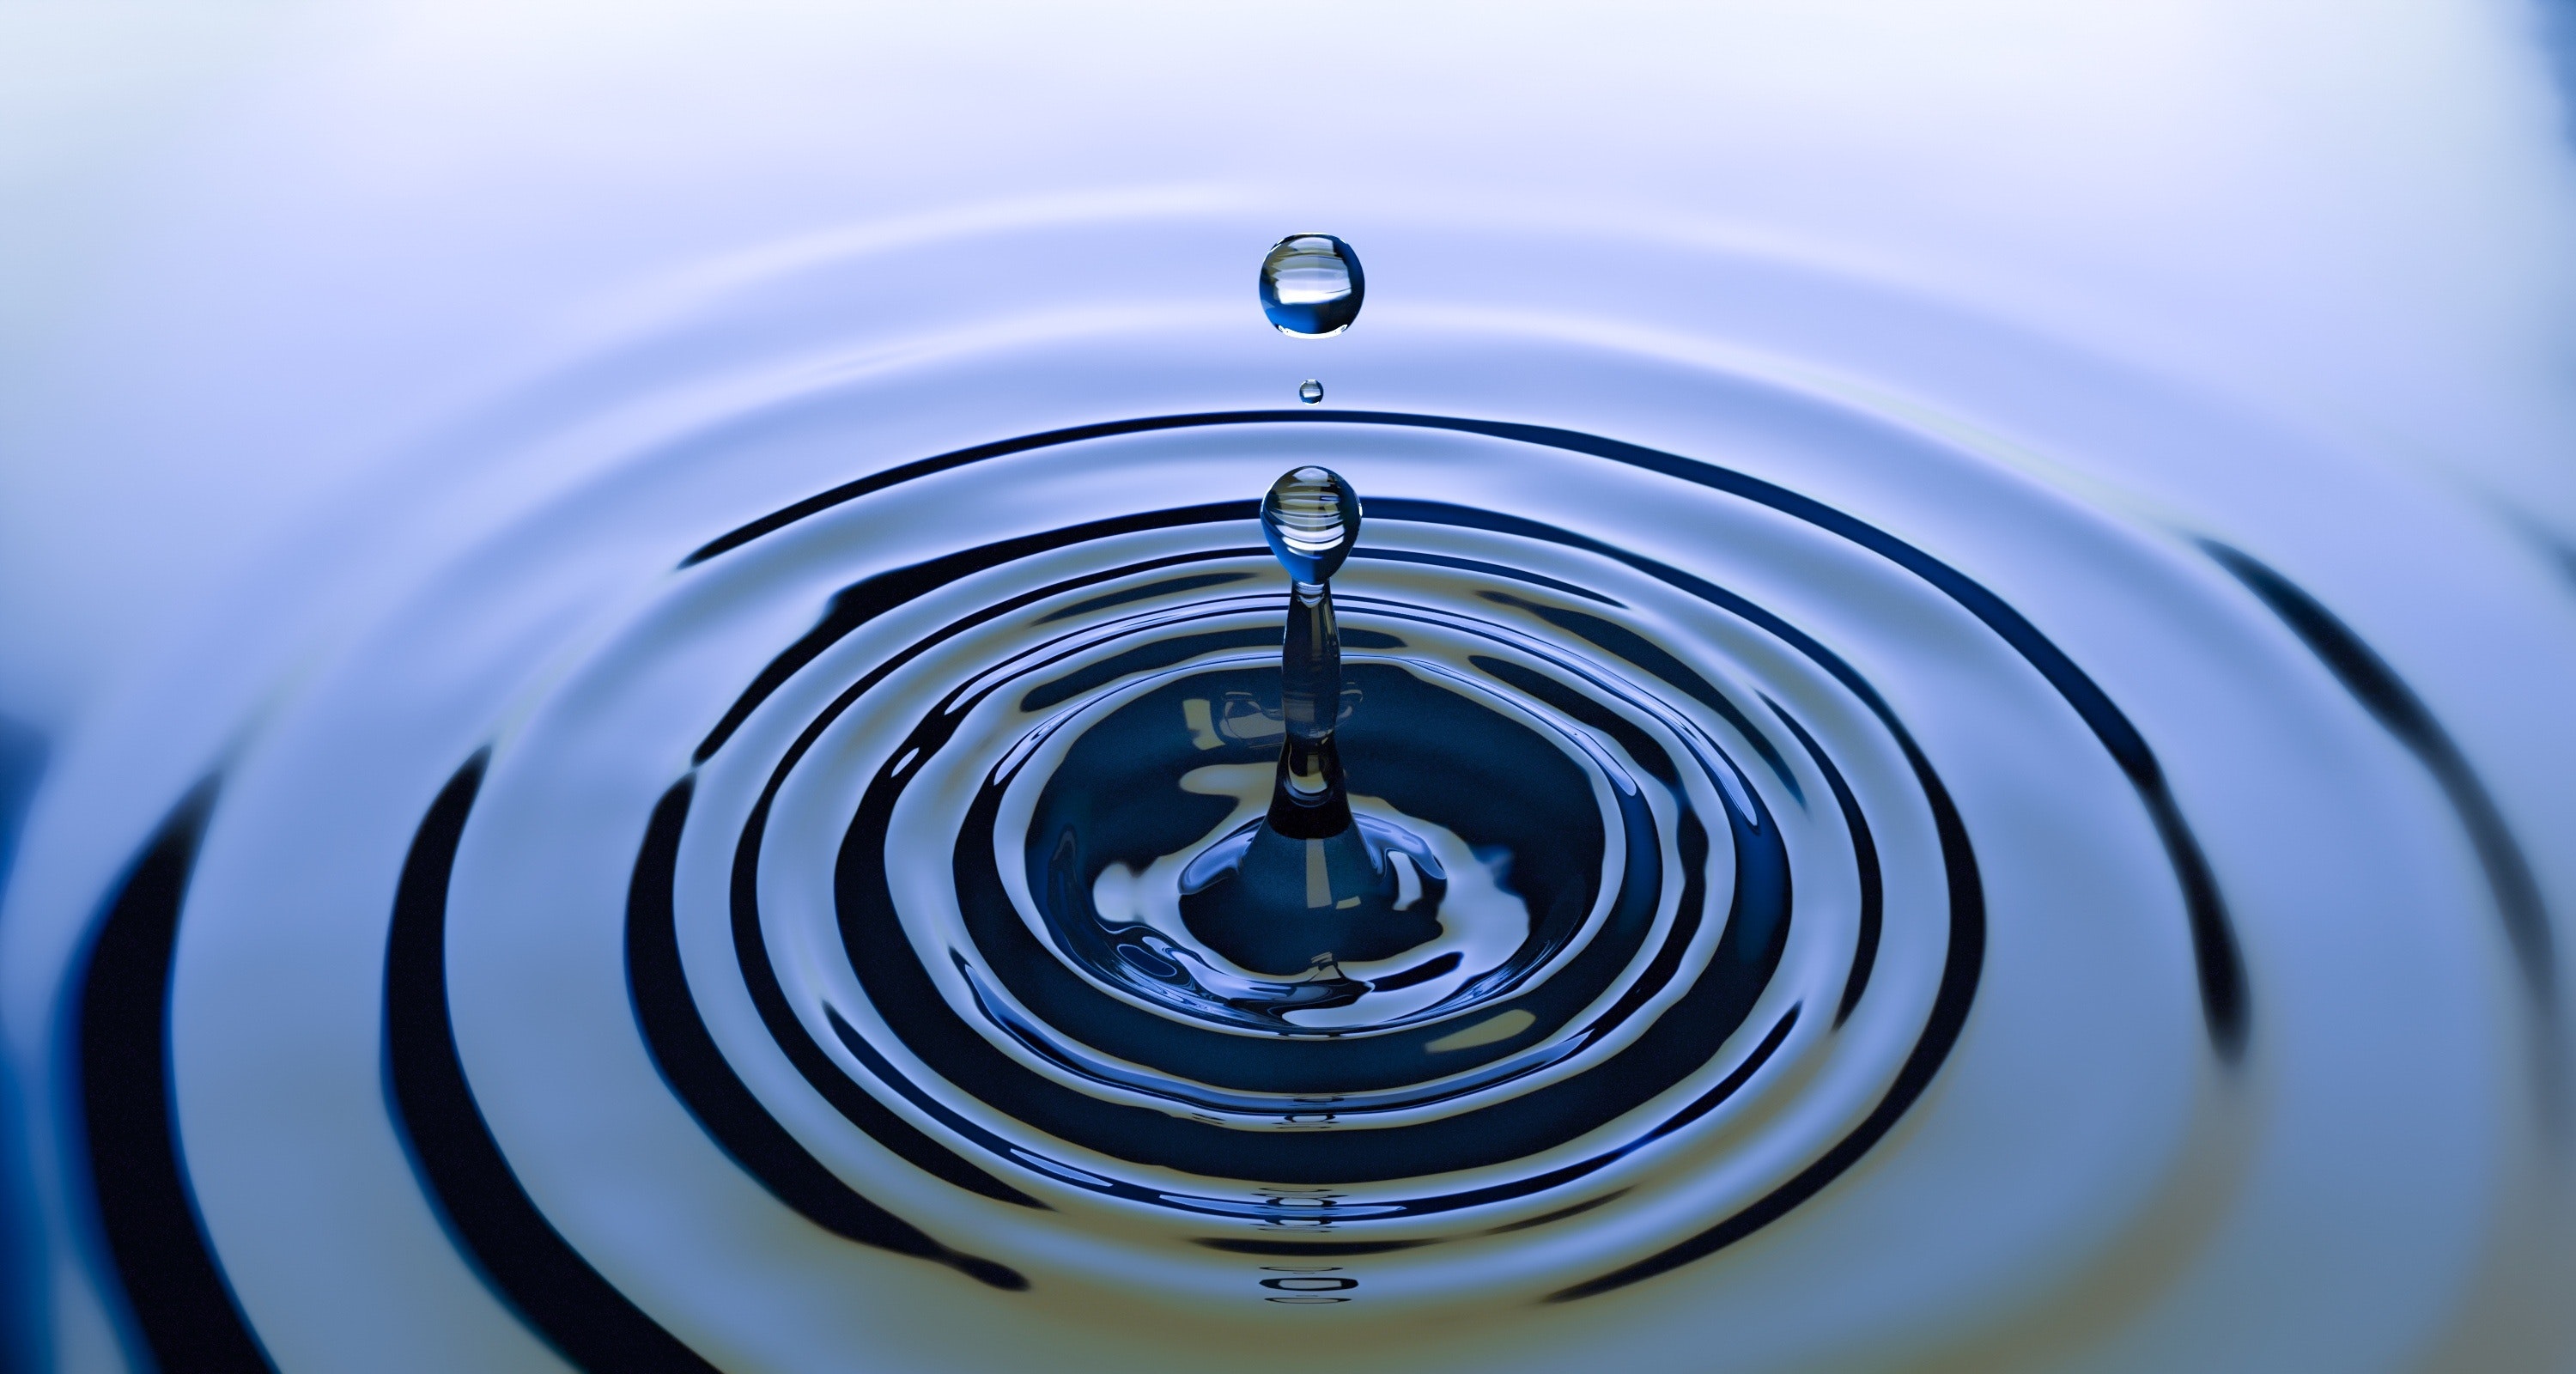 RIPPLE EFFECT definition and meaning | Collins English Dictionary